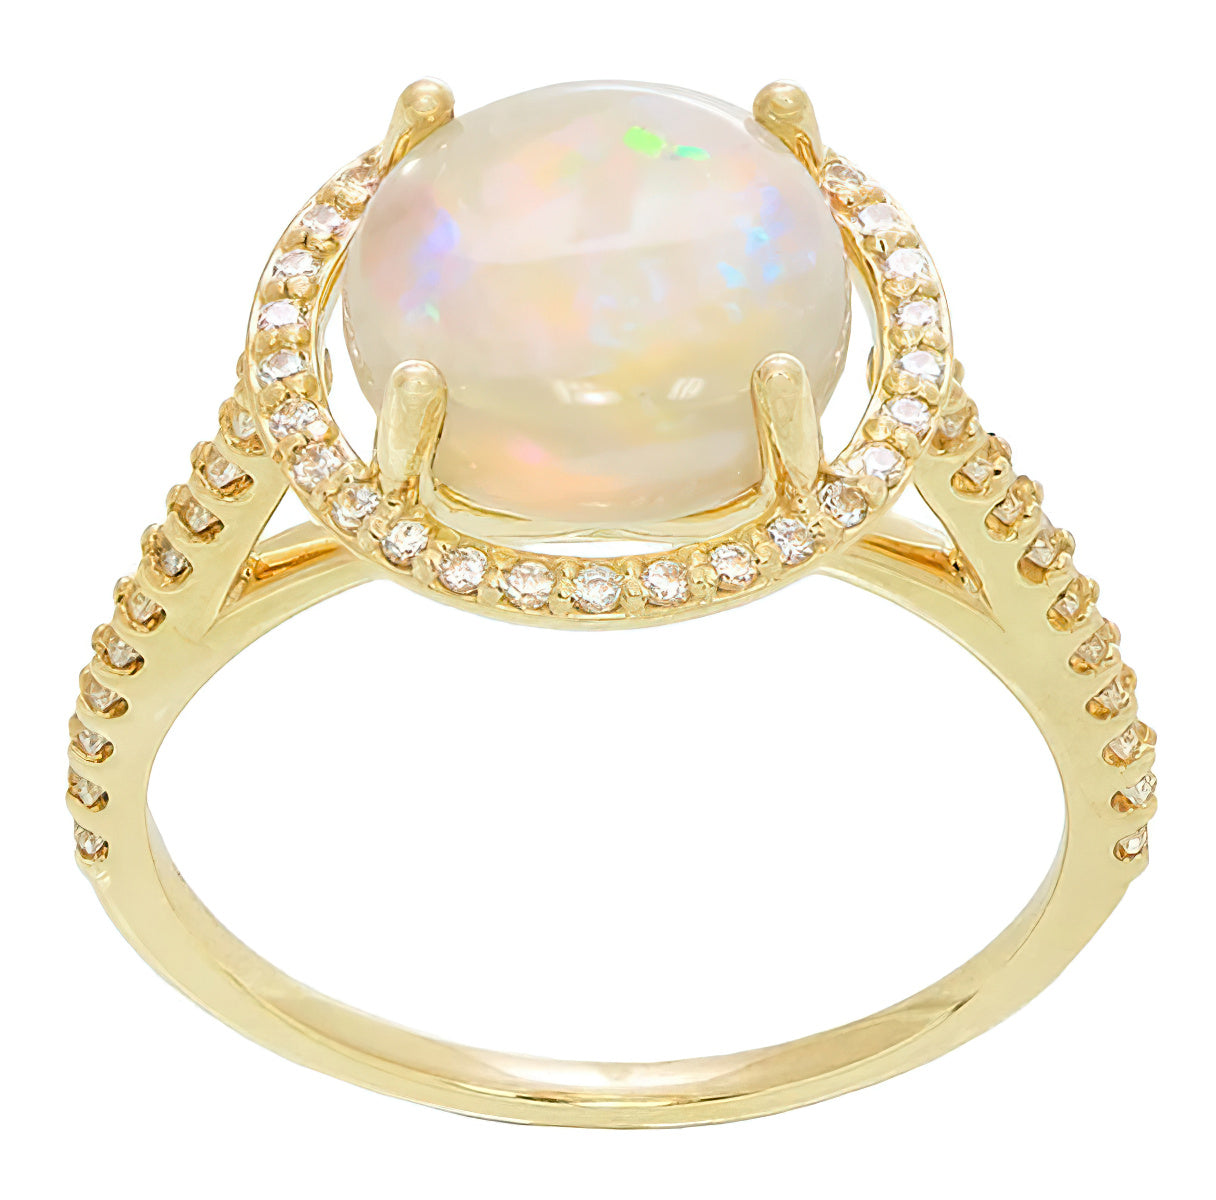 Yellow Gold Cabochon Round Opal Ring with Halo Side Diamonds - 2.60 Carat Opal - Grisey's Ring - Item: R1218Yo - Image: 3